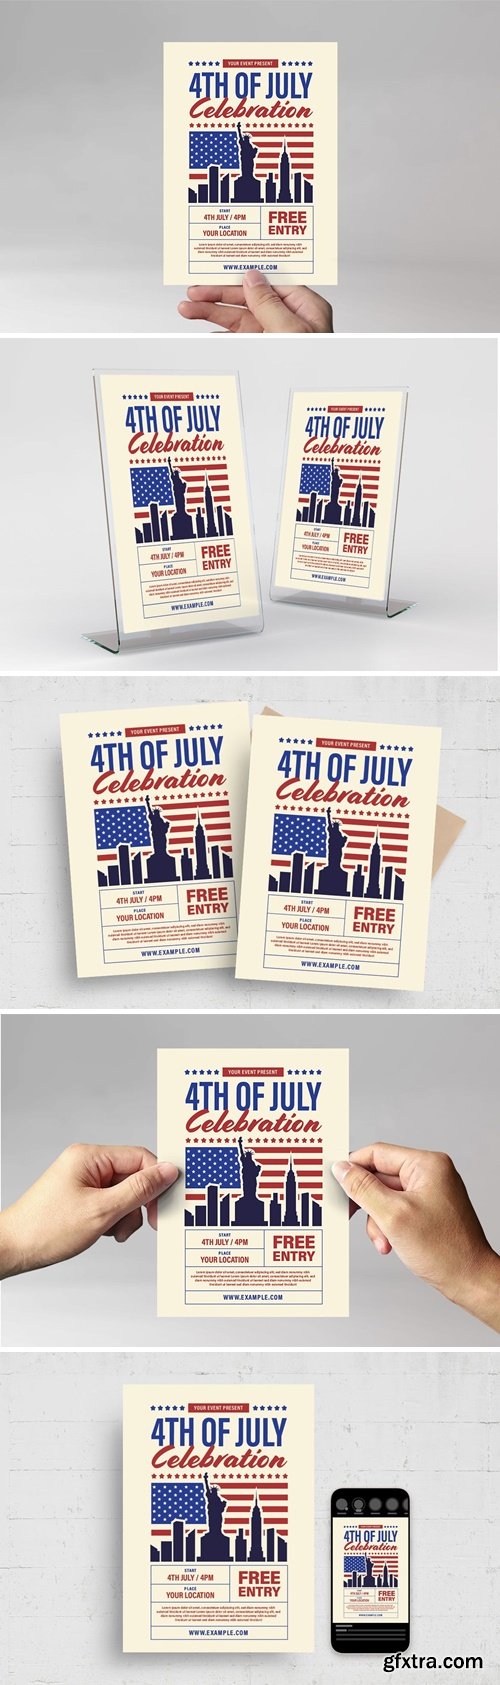 4th of July Flyer Template G56MQ8L